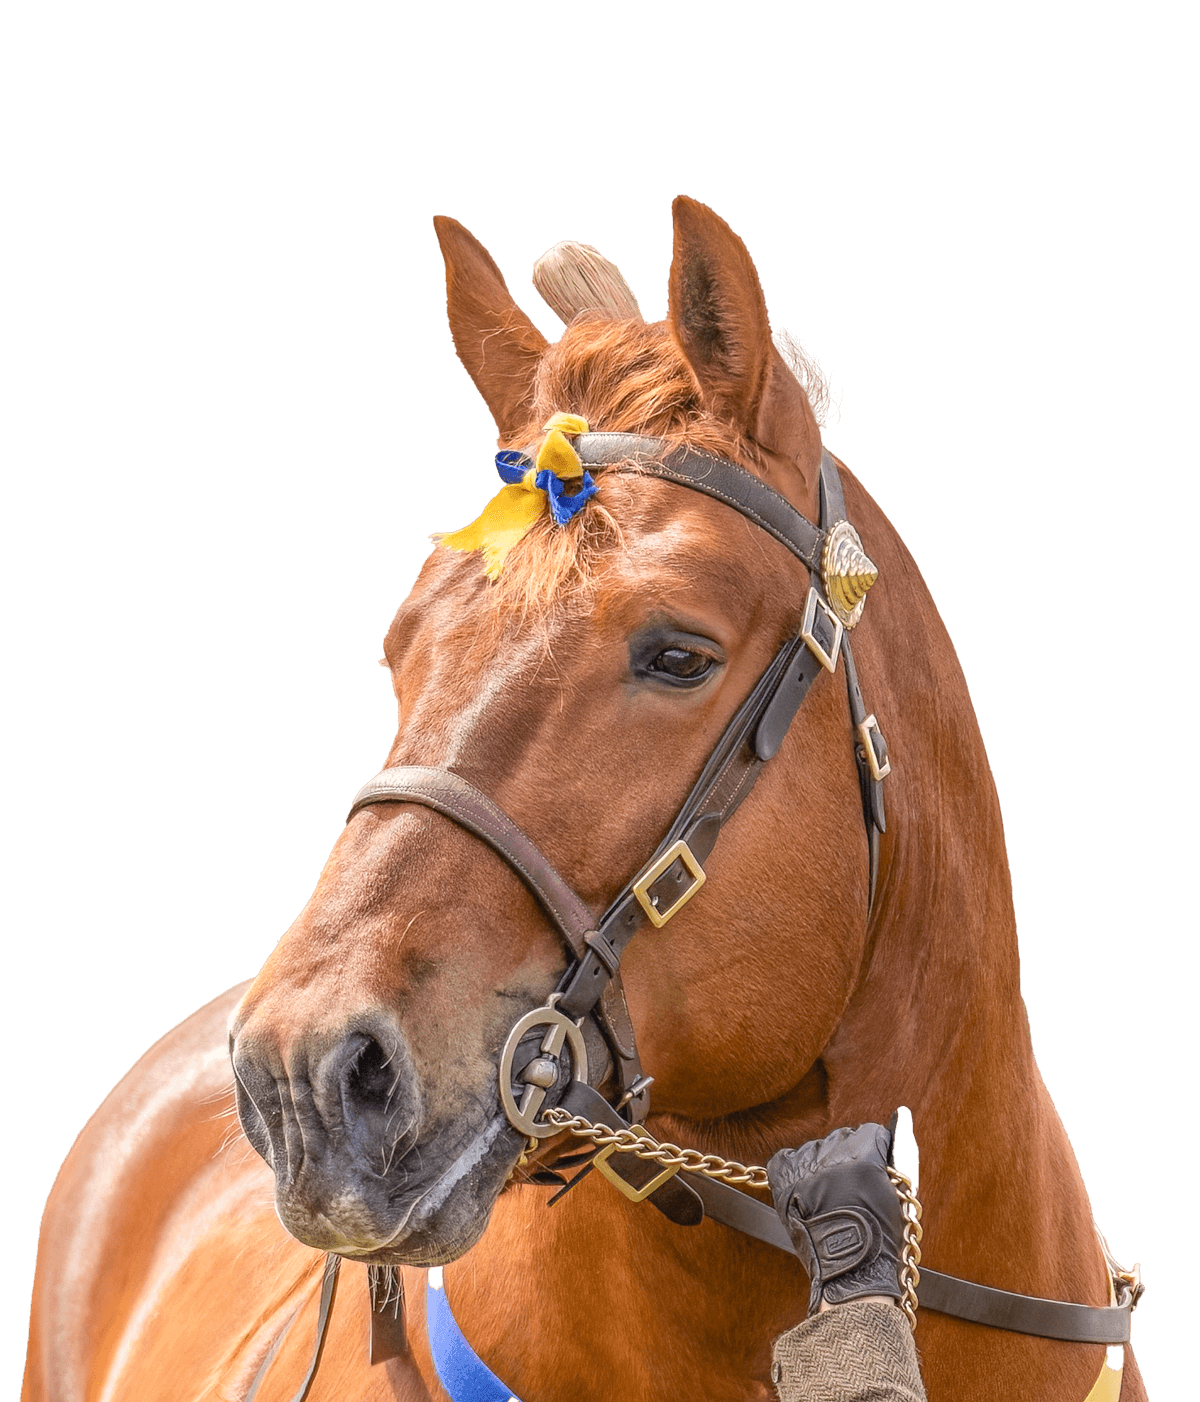 A chesnut brown horse wearing a bridle and a blue and yellow ribbon, from the Suffolk Punch Trust charity